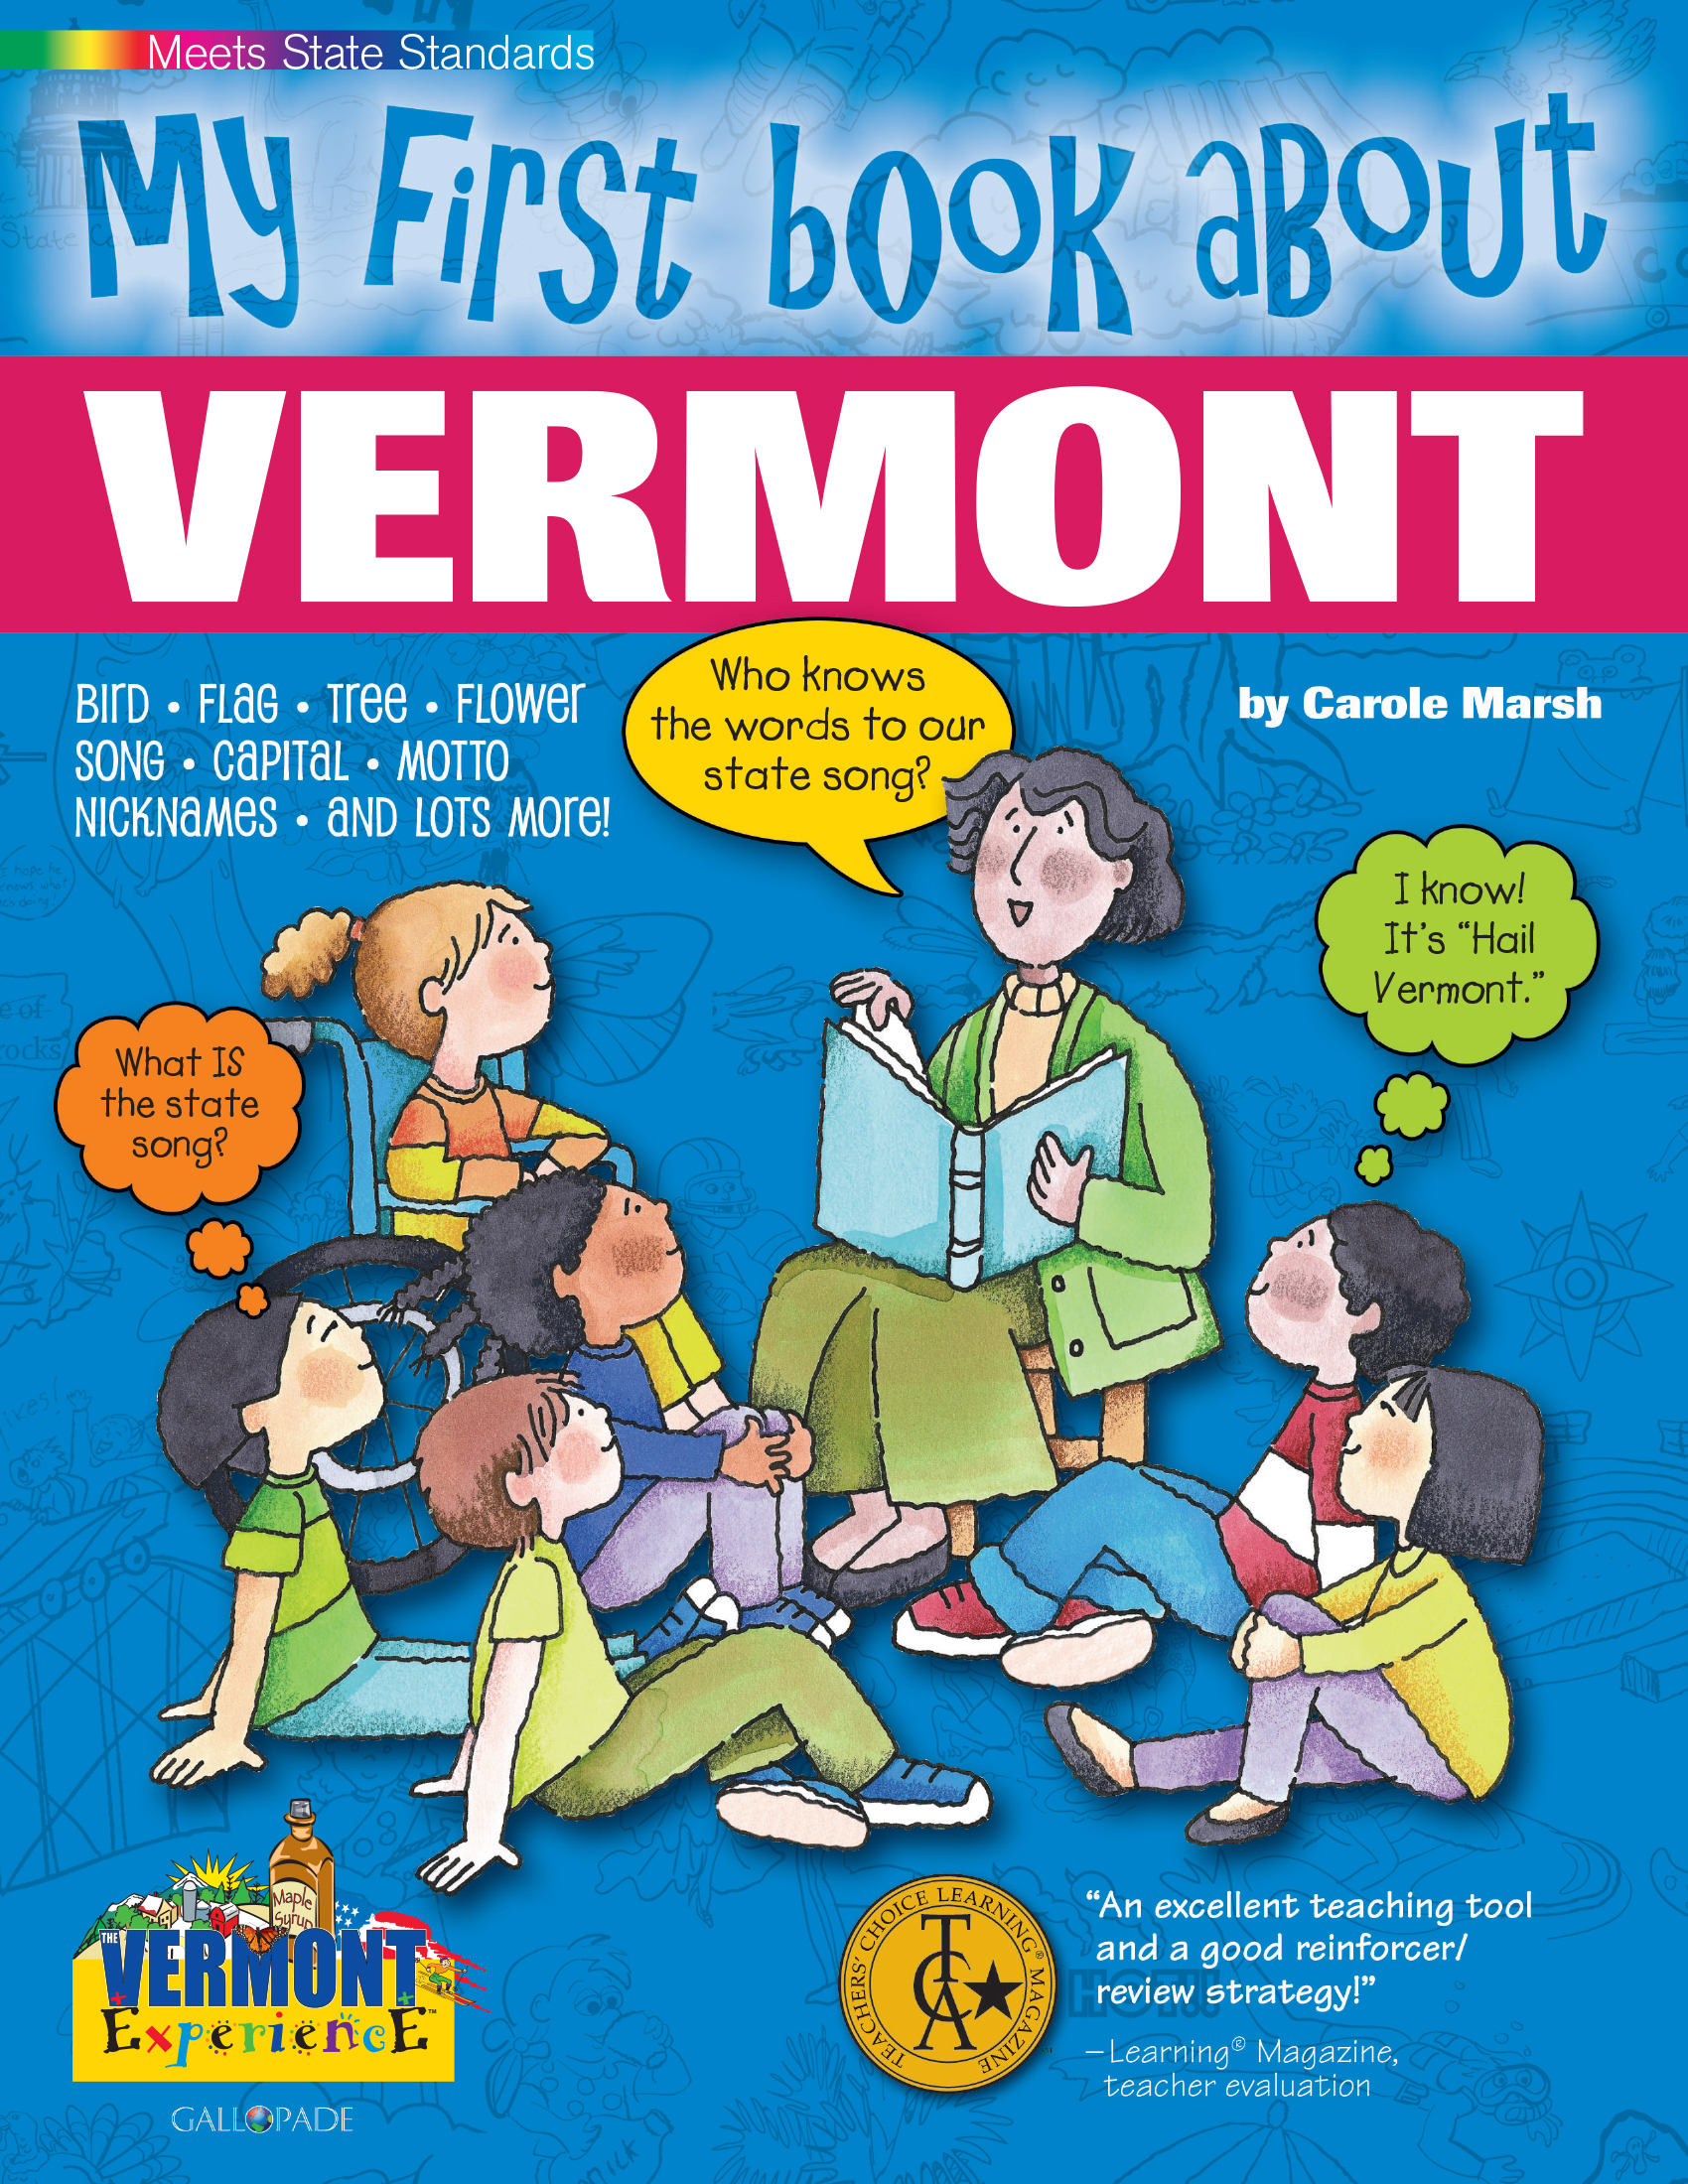 My First Book About Vermont!